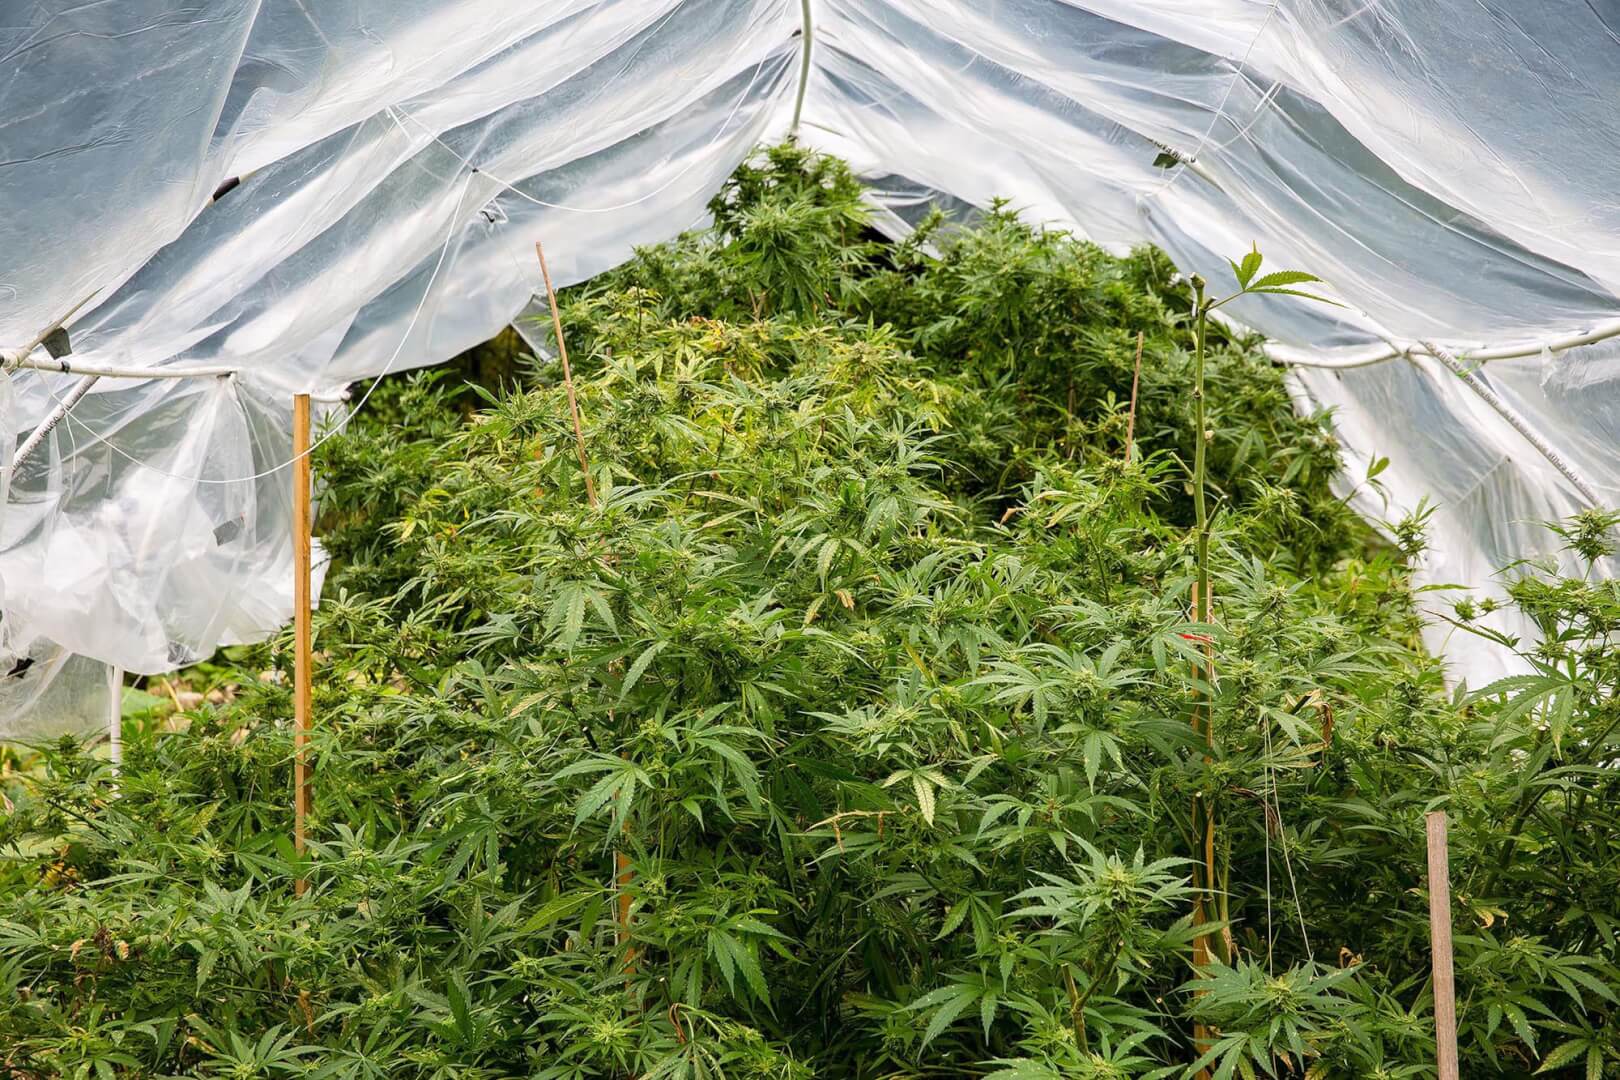 How To Protect Your Outdoor Grow From Rain, Wind & People